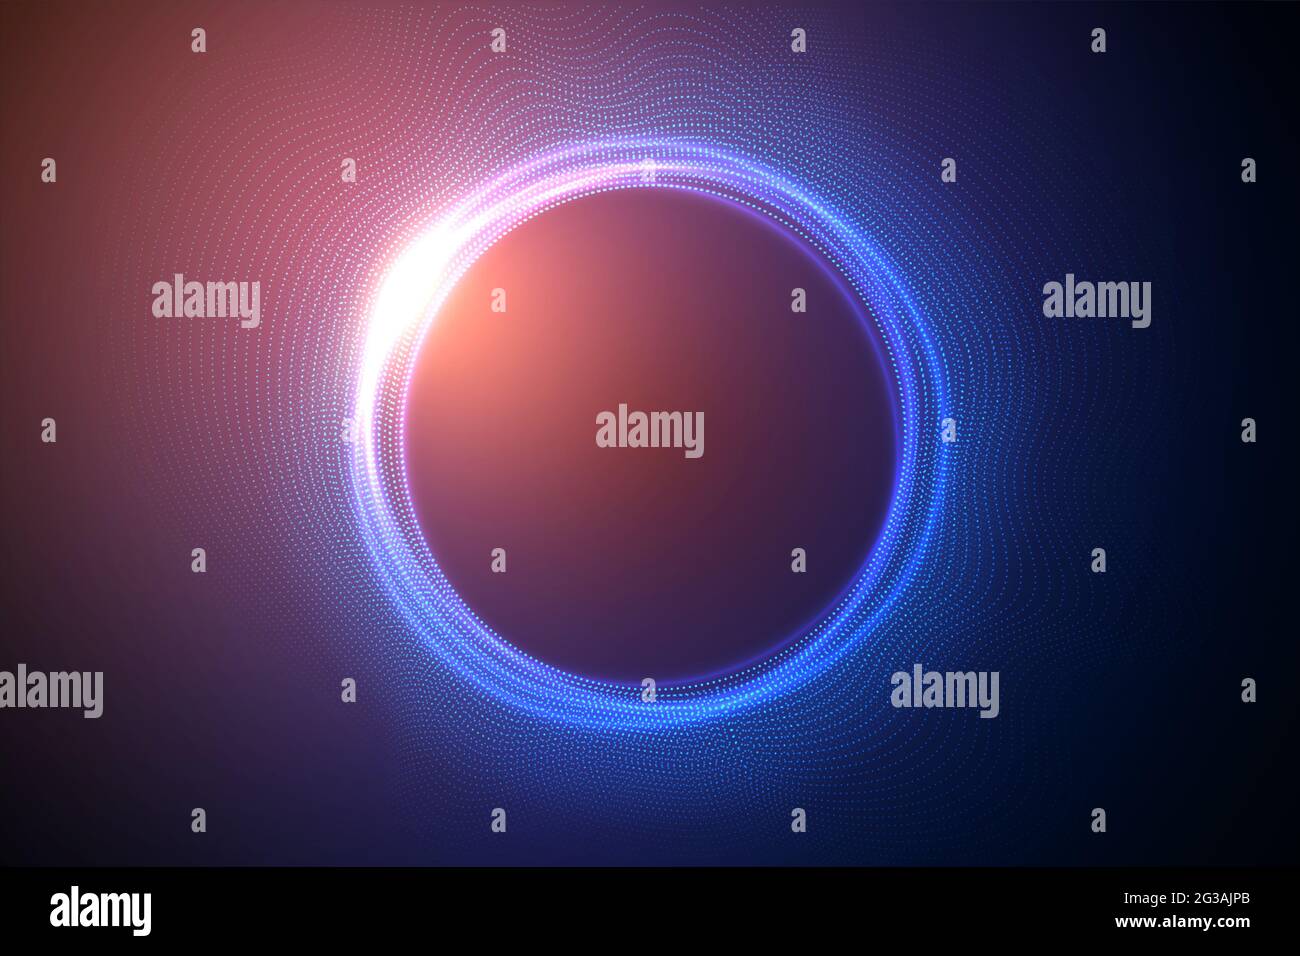 Glowing circles from dots with depth of field effect. Black hole, sphere, circle. Music, science, technology particles background. Stock Photo